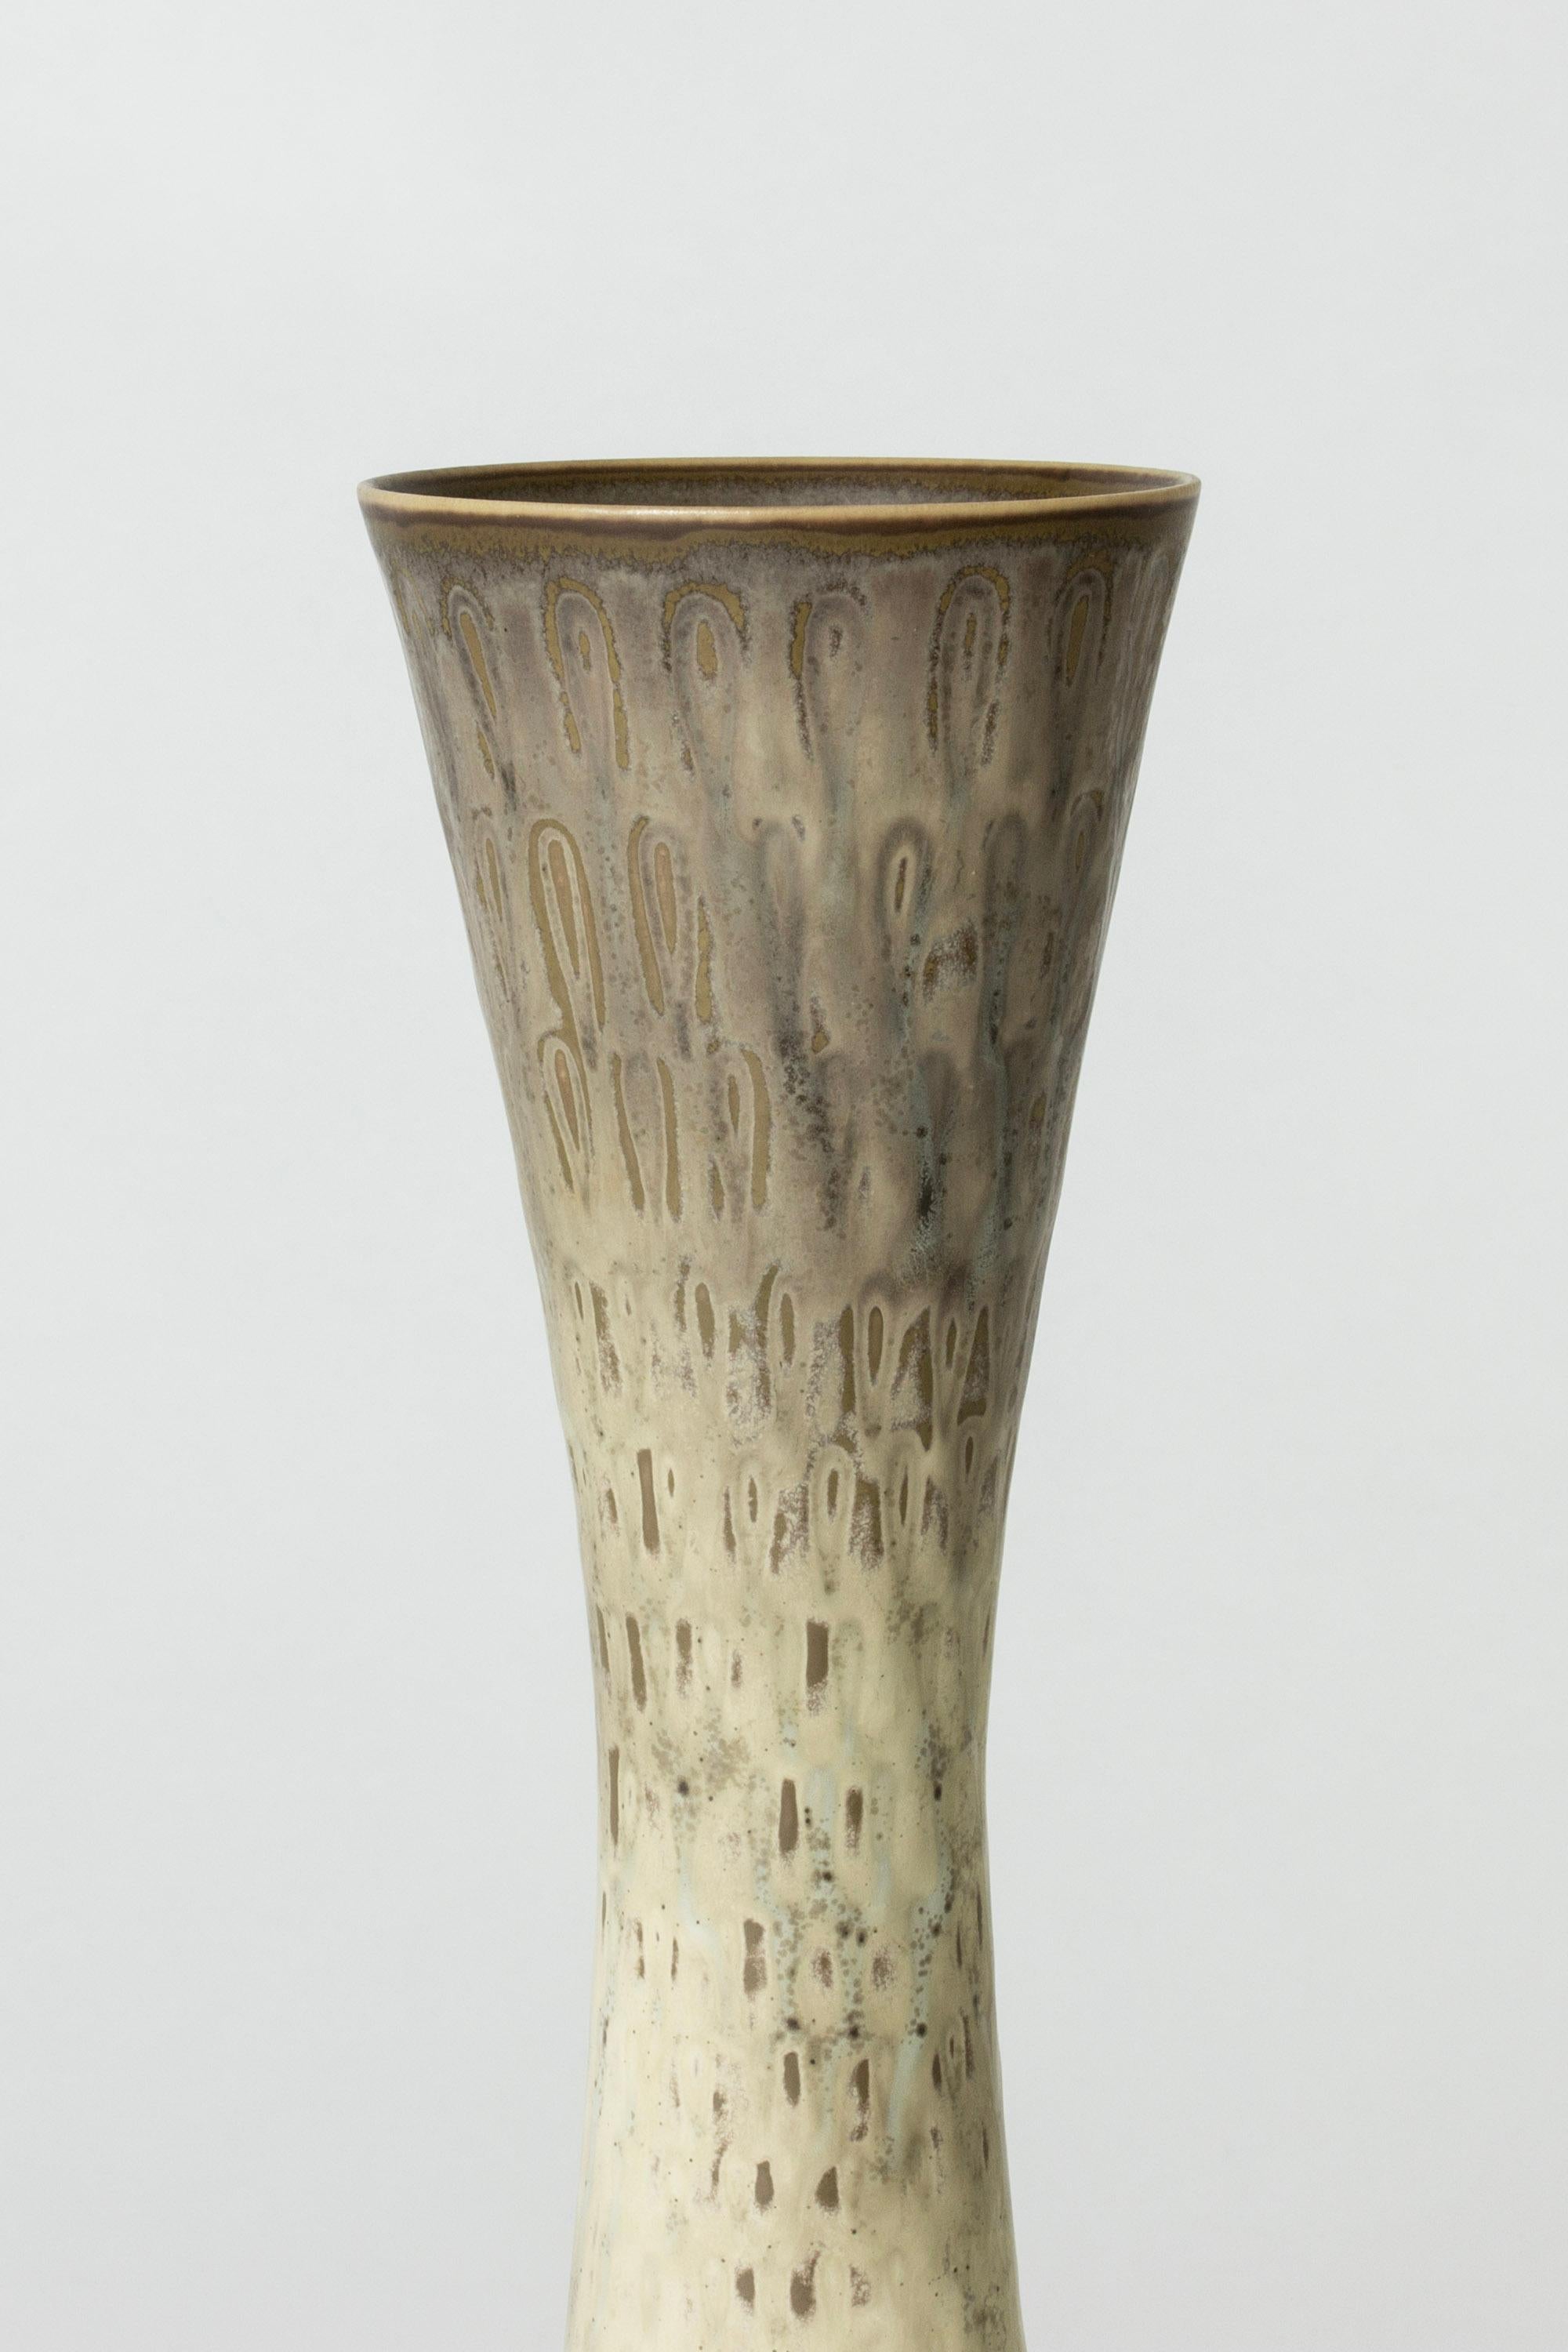 Striking stoneware vase by Carl-Harry Stålhane in a sleek form, with eggshell glaze and a subtle graphic pattern. Flecks of brown and white around the rim and base.

Carl-Harry Stålhane was one of the stars among Swedish ceramic artists during the